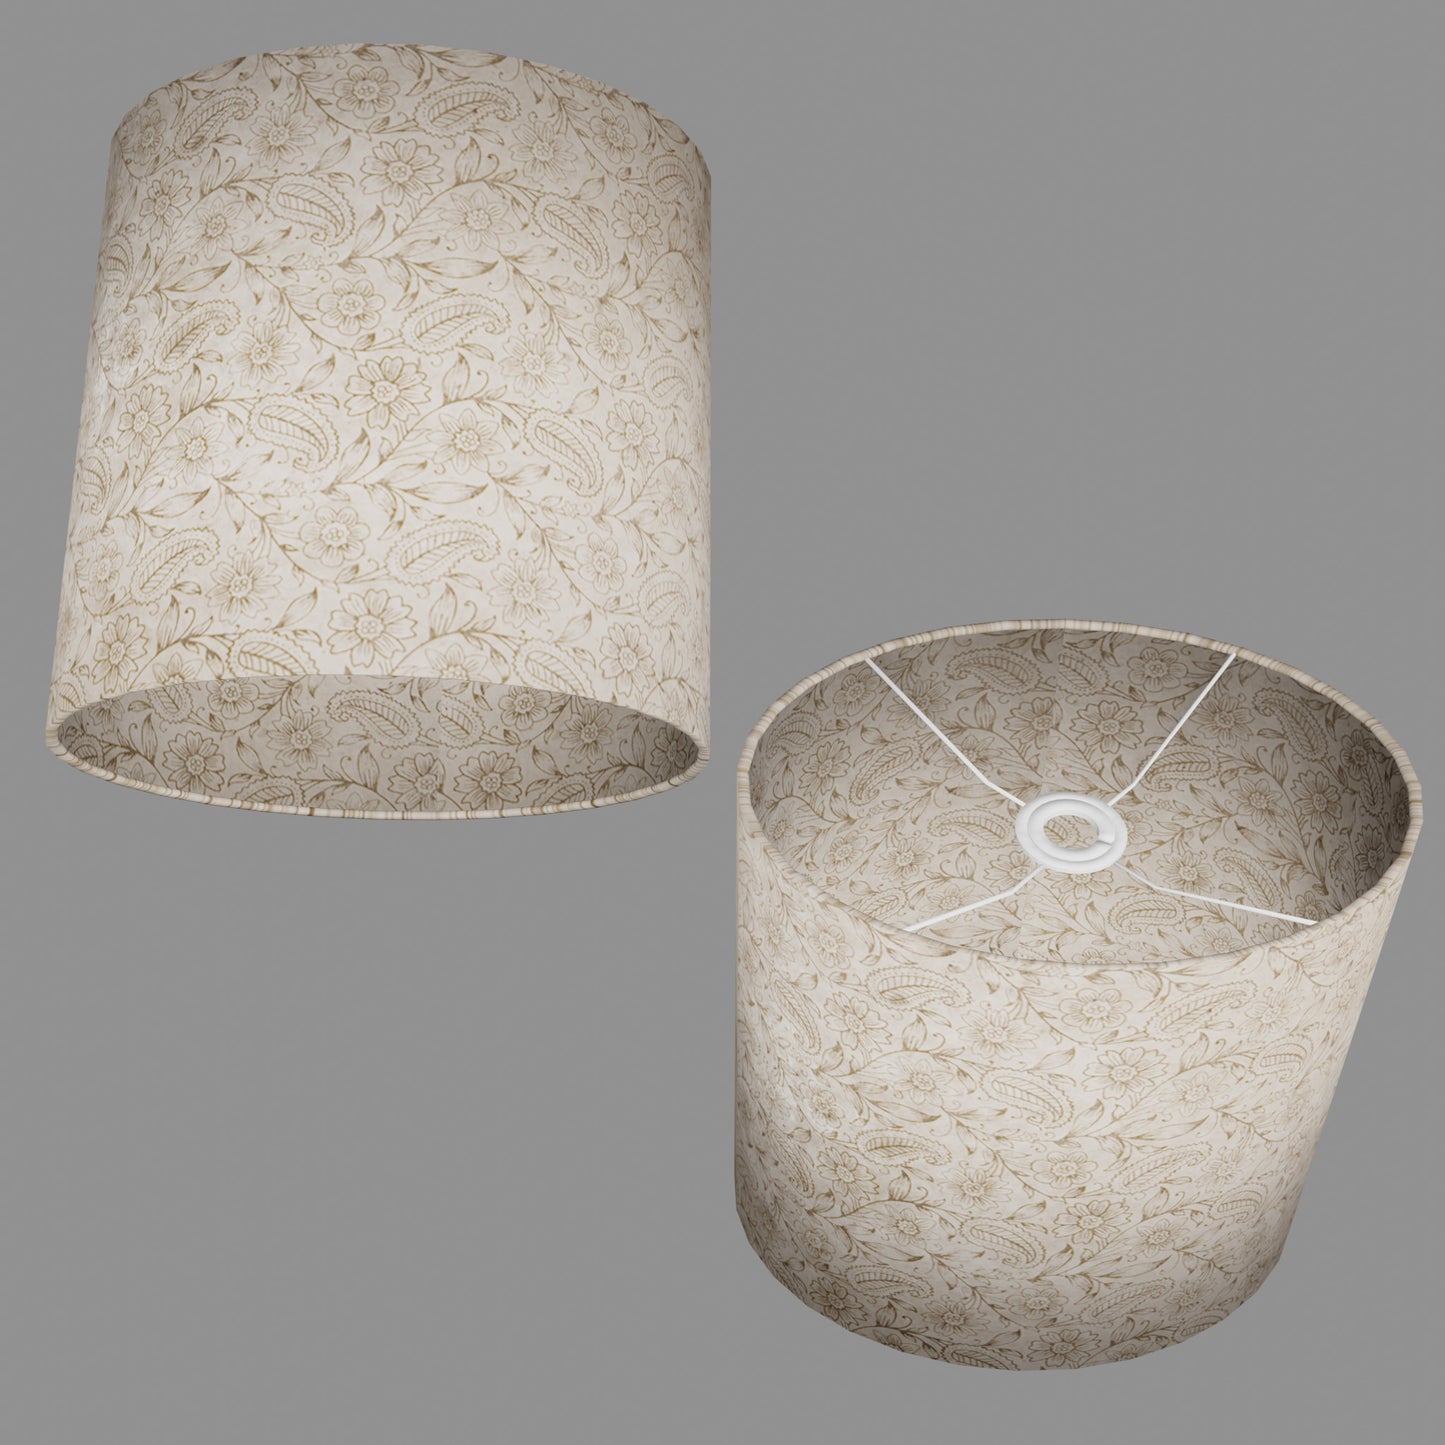 Oval Lamp Shade - P69 - Garden Gold on Natural, 30cm(w) x 30cm(h) x 22cm(d)